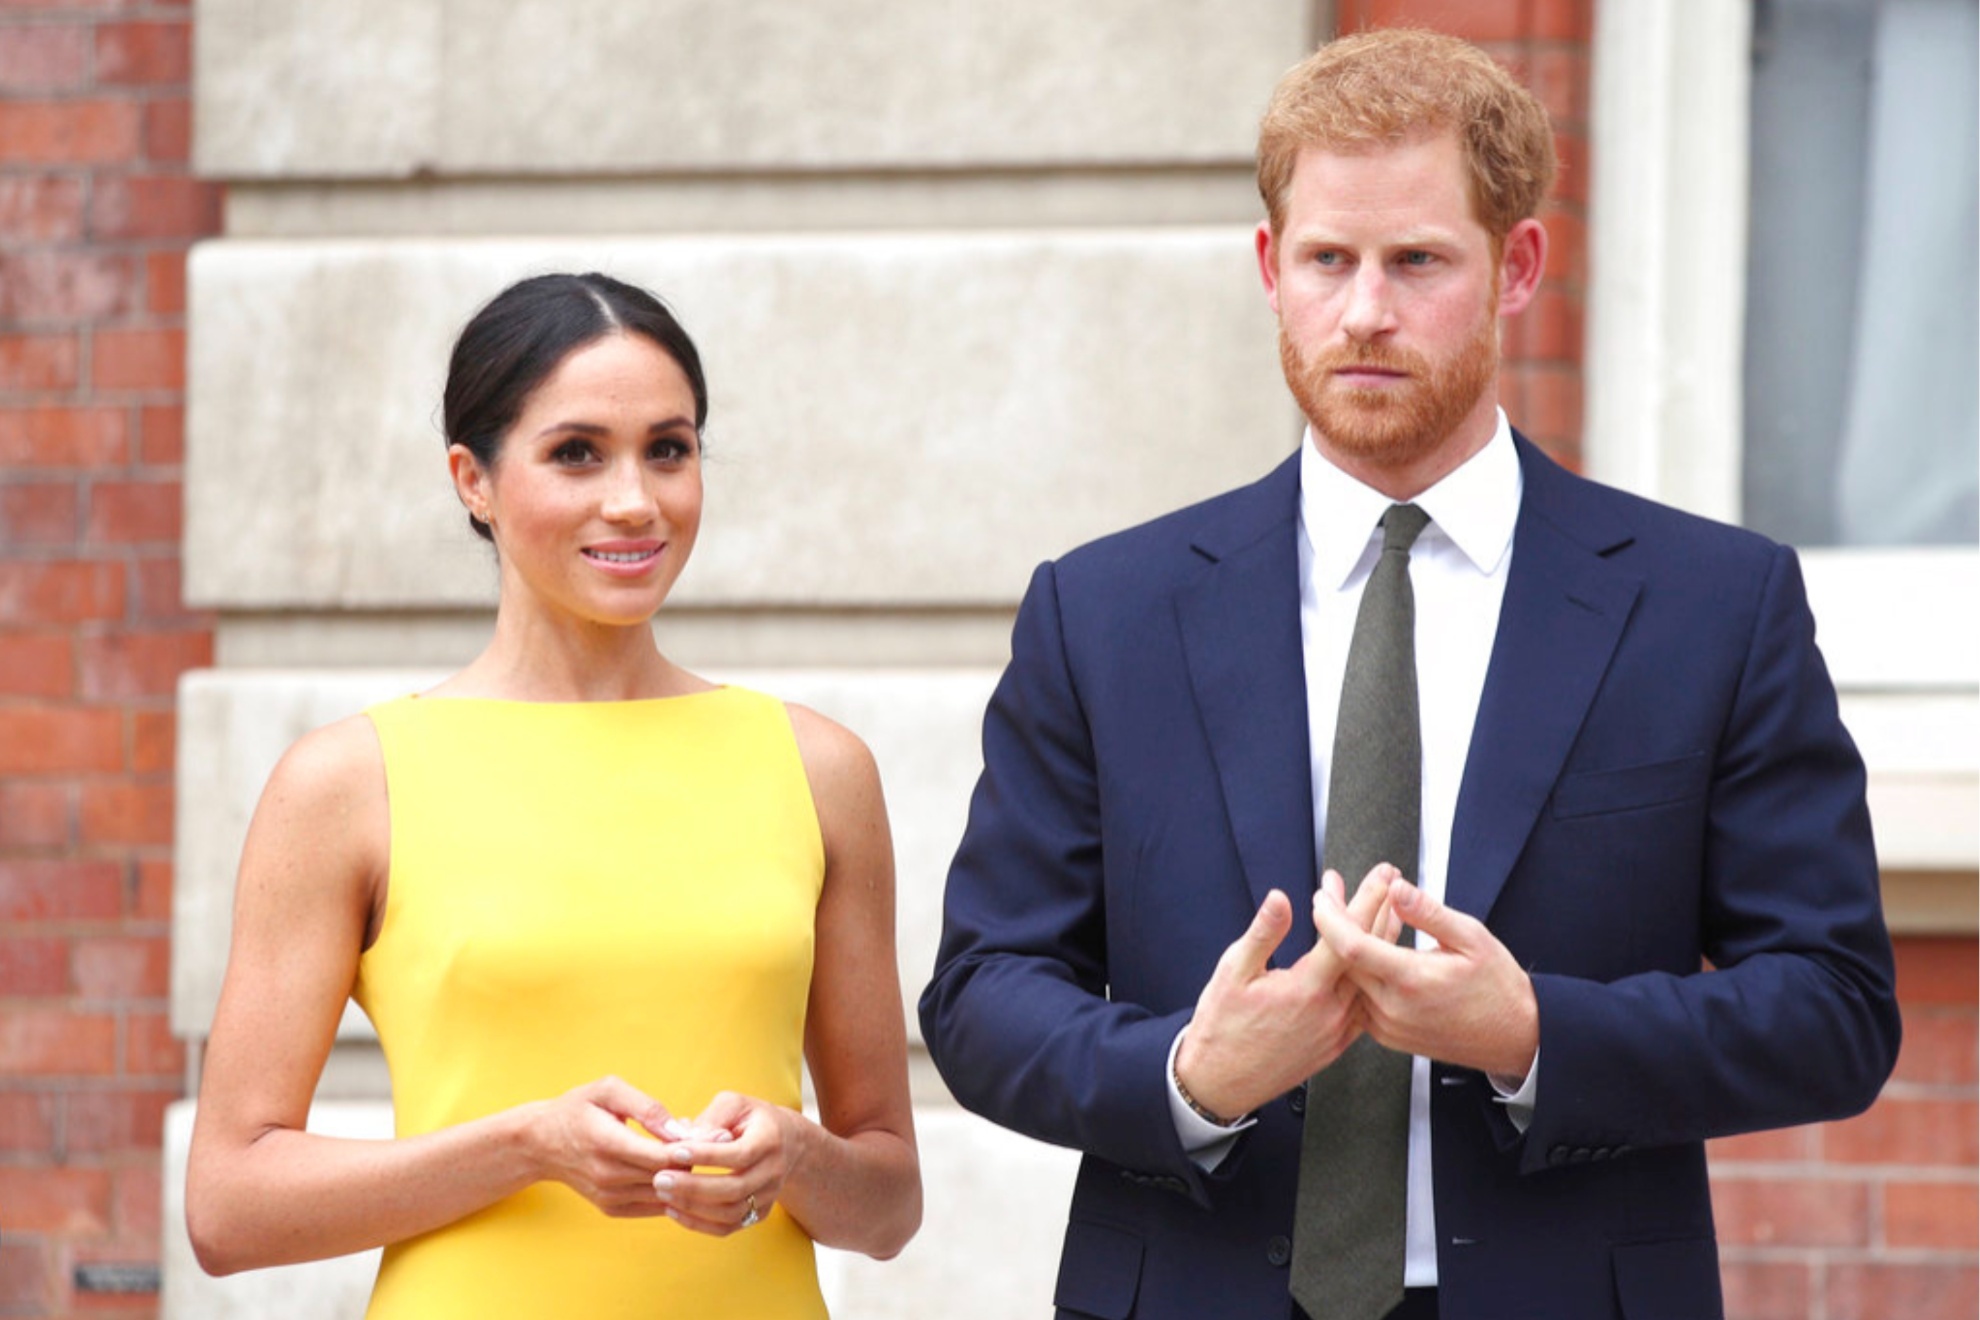 Burrell calls Harry and Meghan Ginge and Whinge.